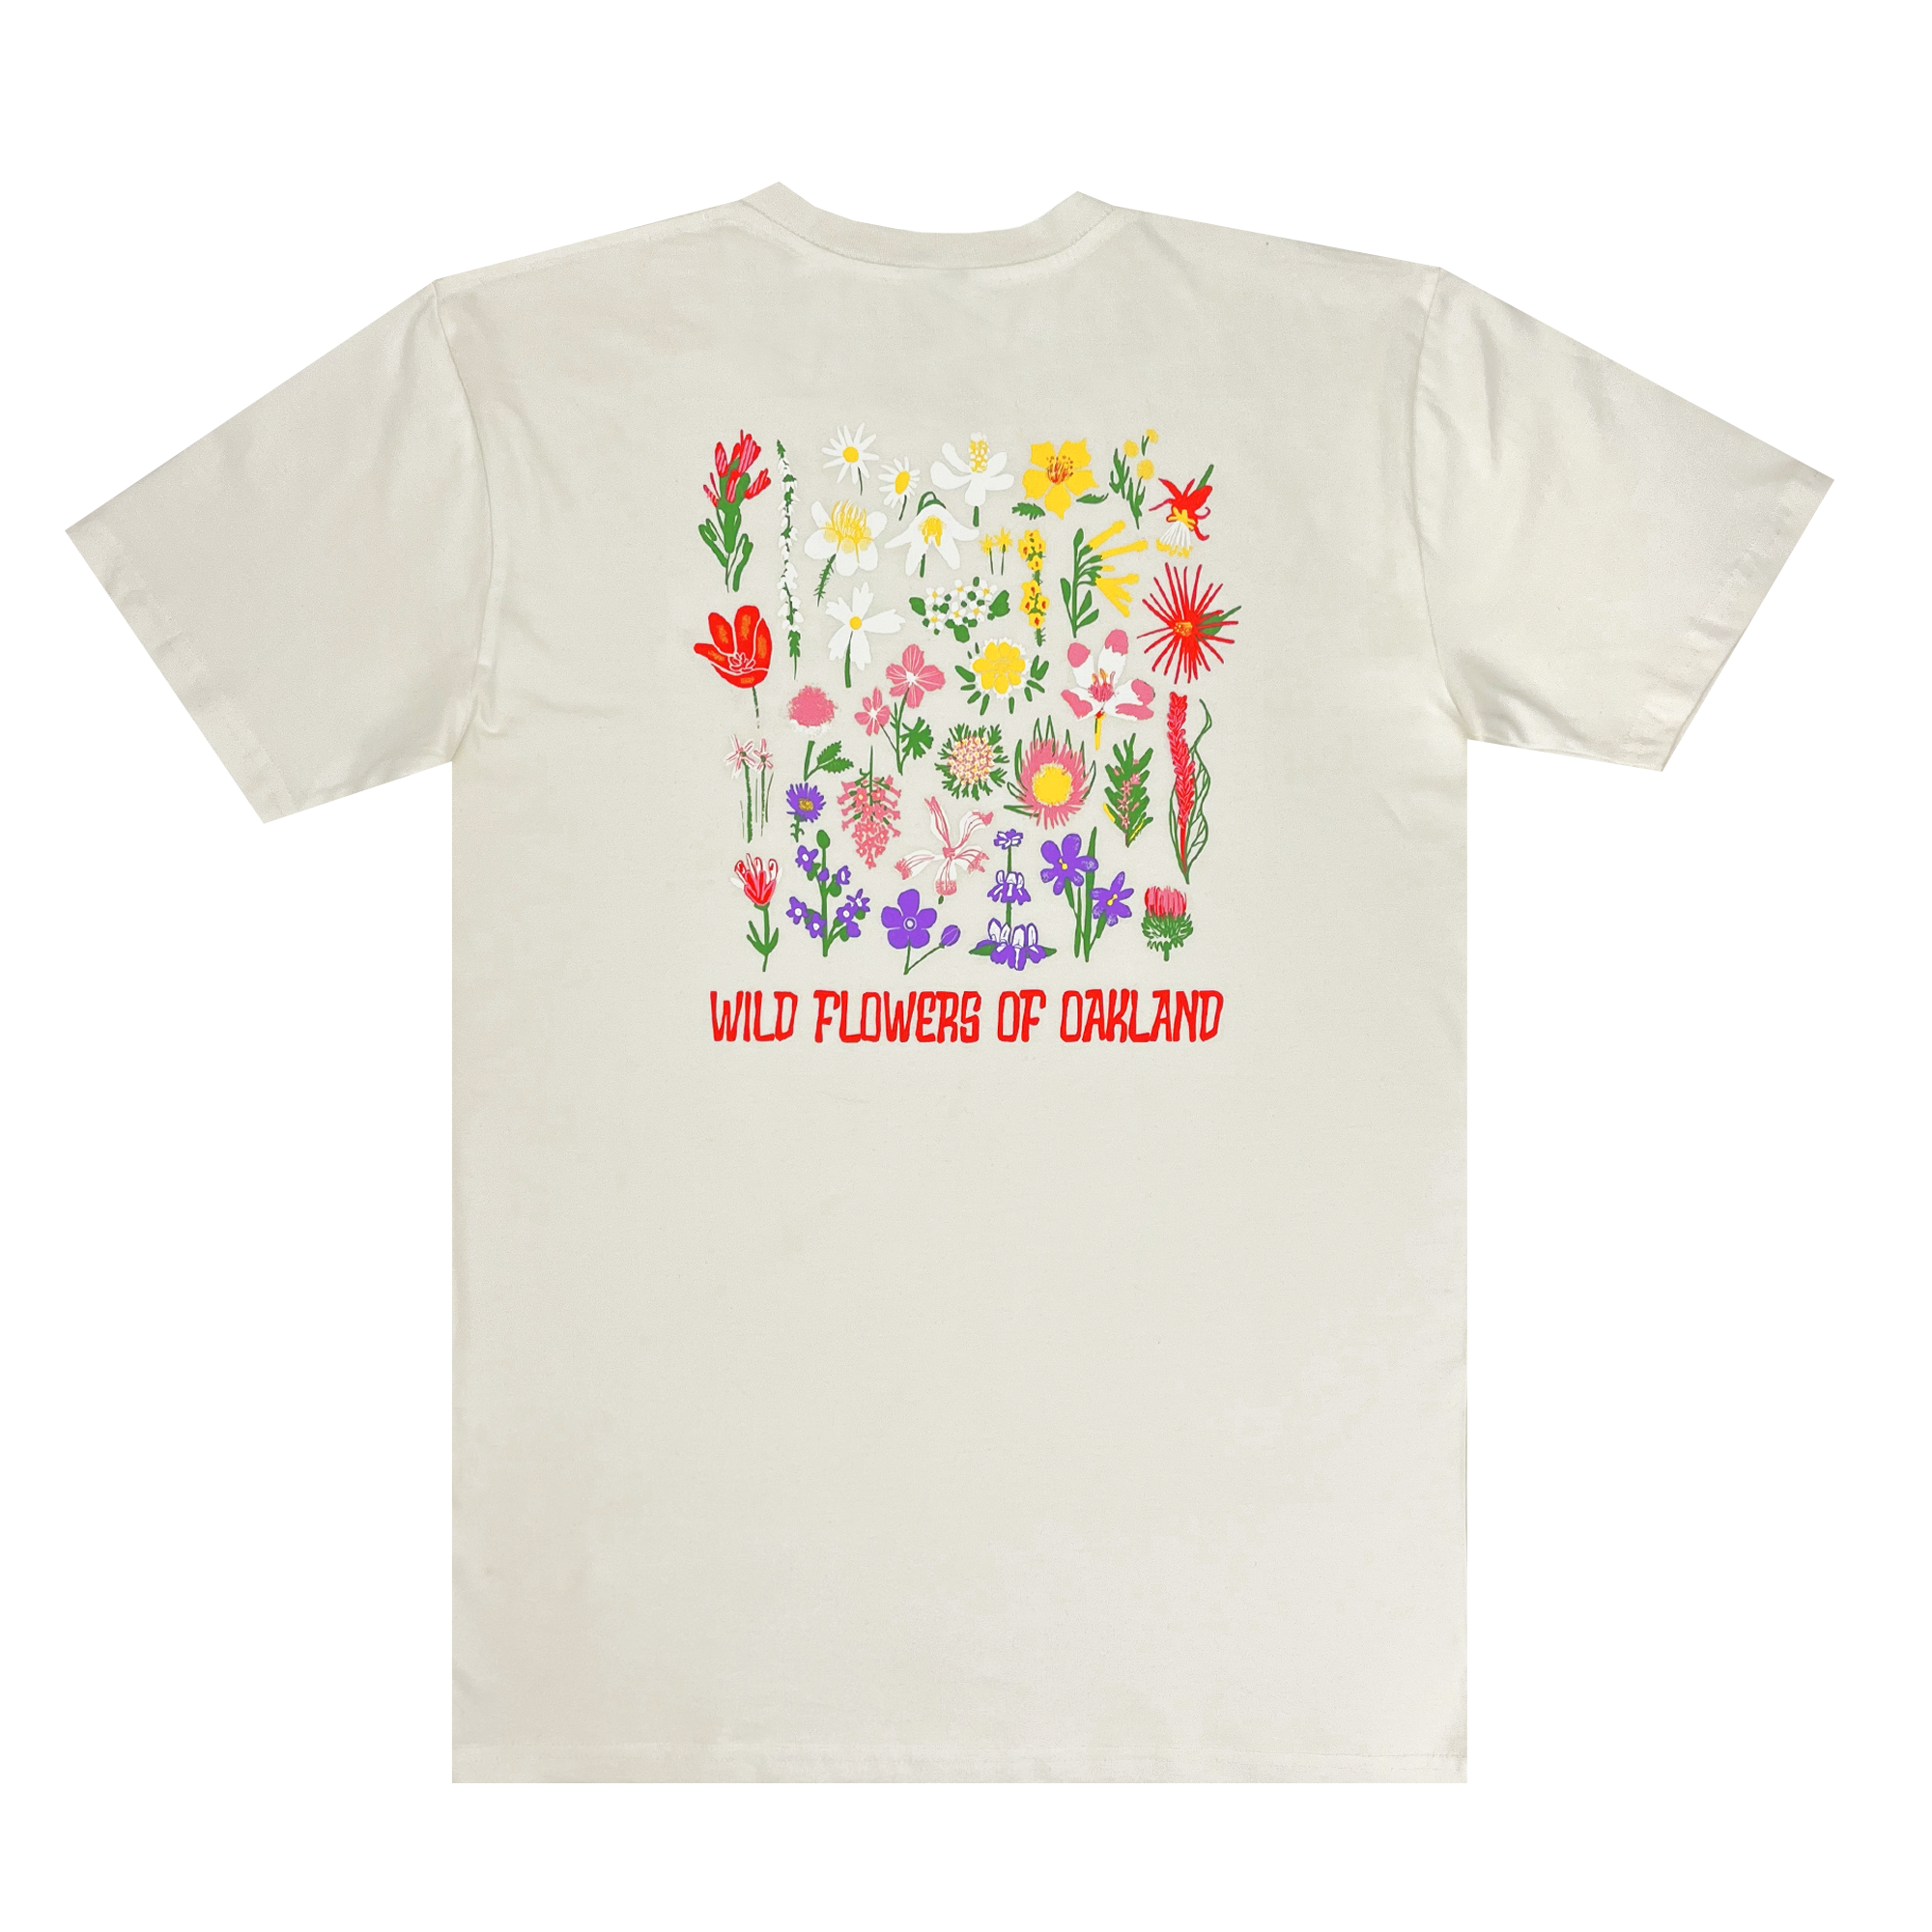 Back view of a natural cotton-color t-shirt with a graphic depicting various flowers captioned WILD FLOWERS OF OAKLAND.